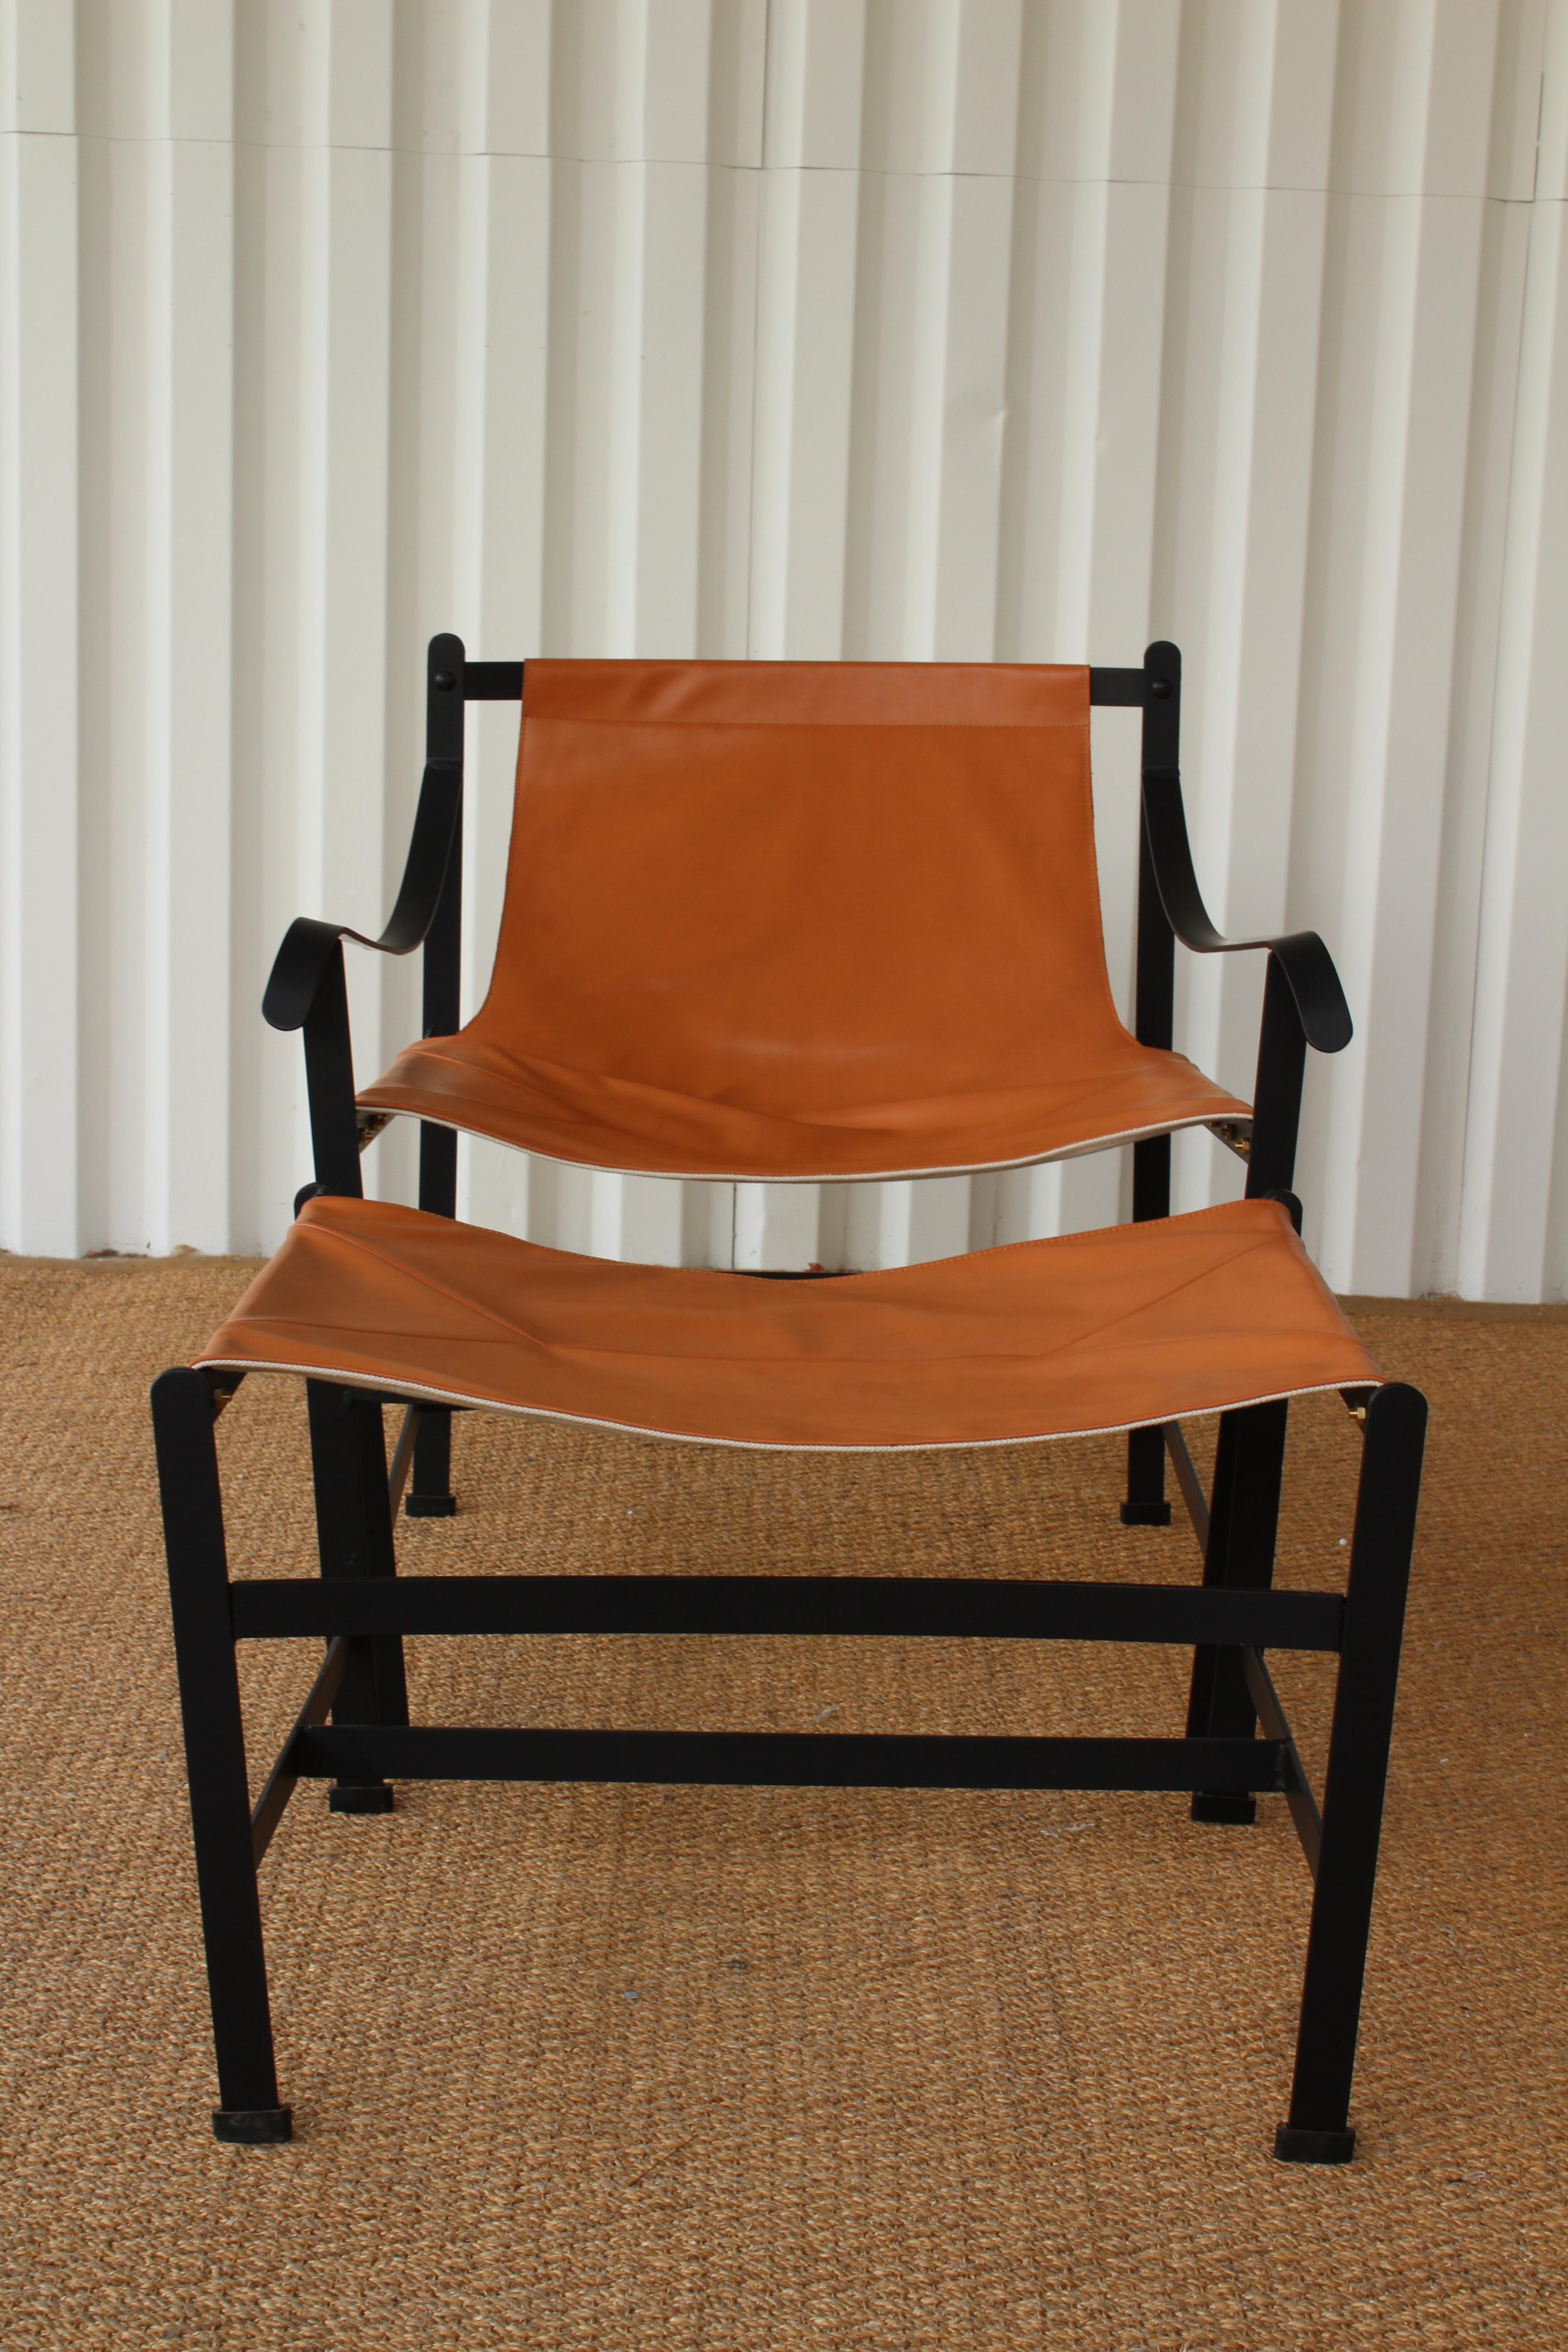 Iron and leather sling chair in the manner of William Katavolos. Iron frame has been professionally powder-coated. The leather sling is new.